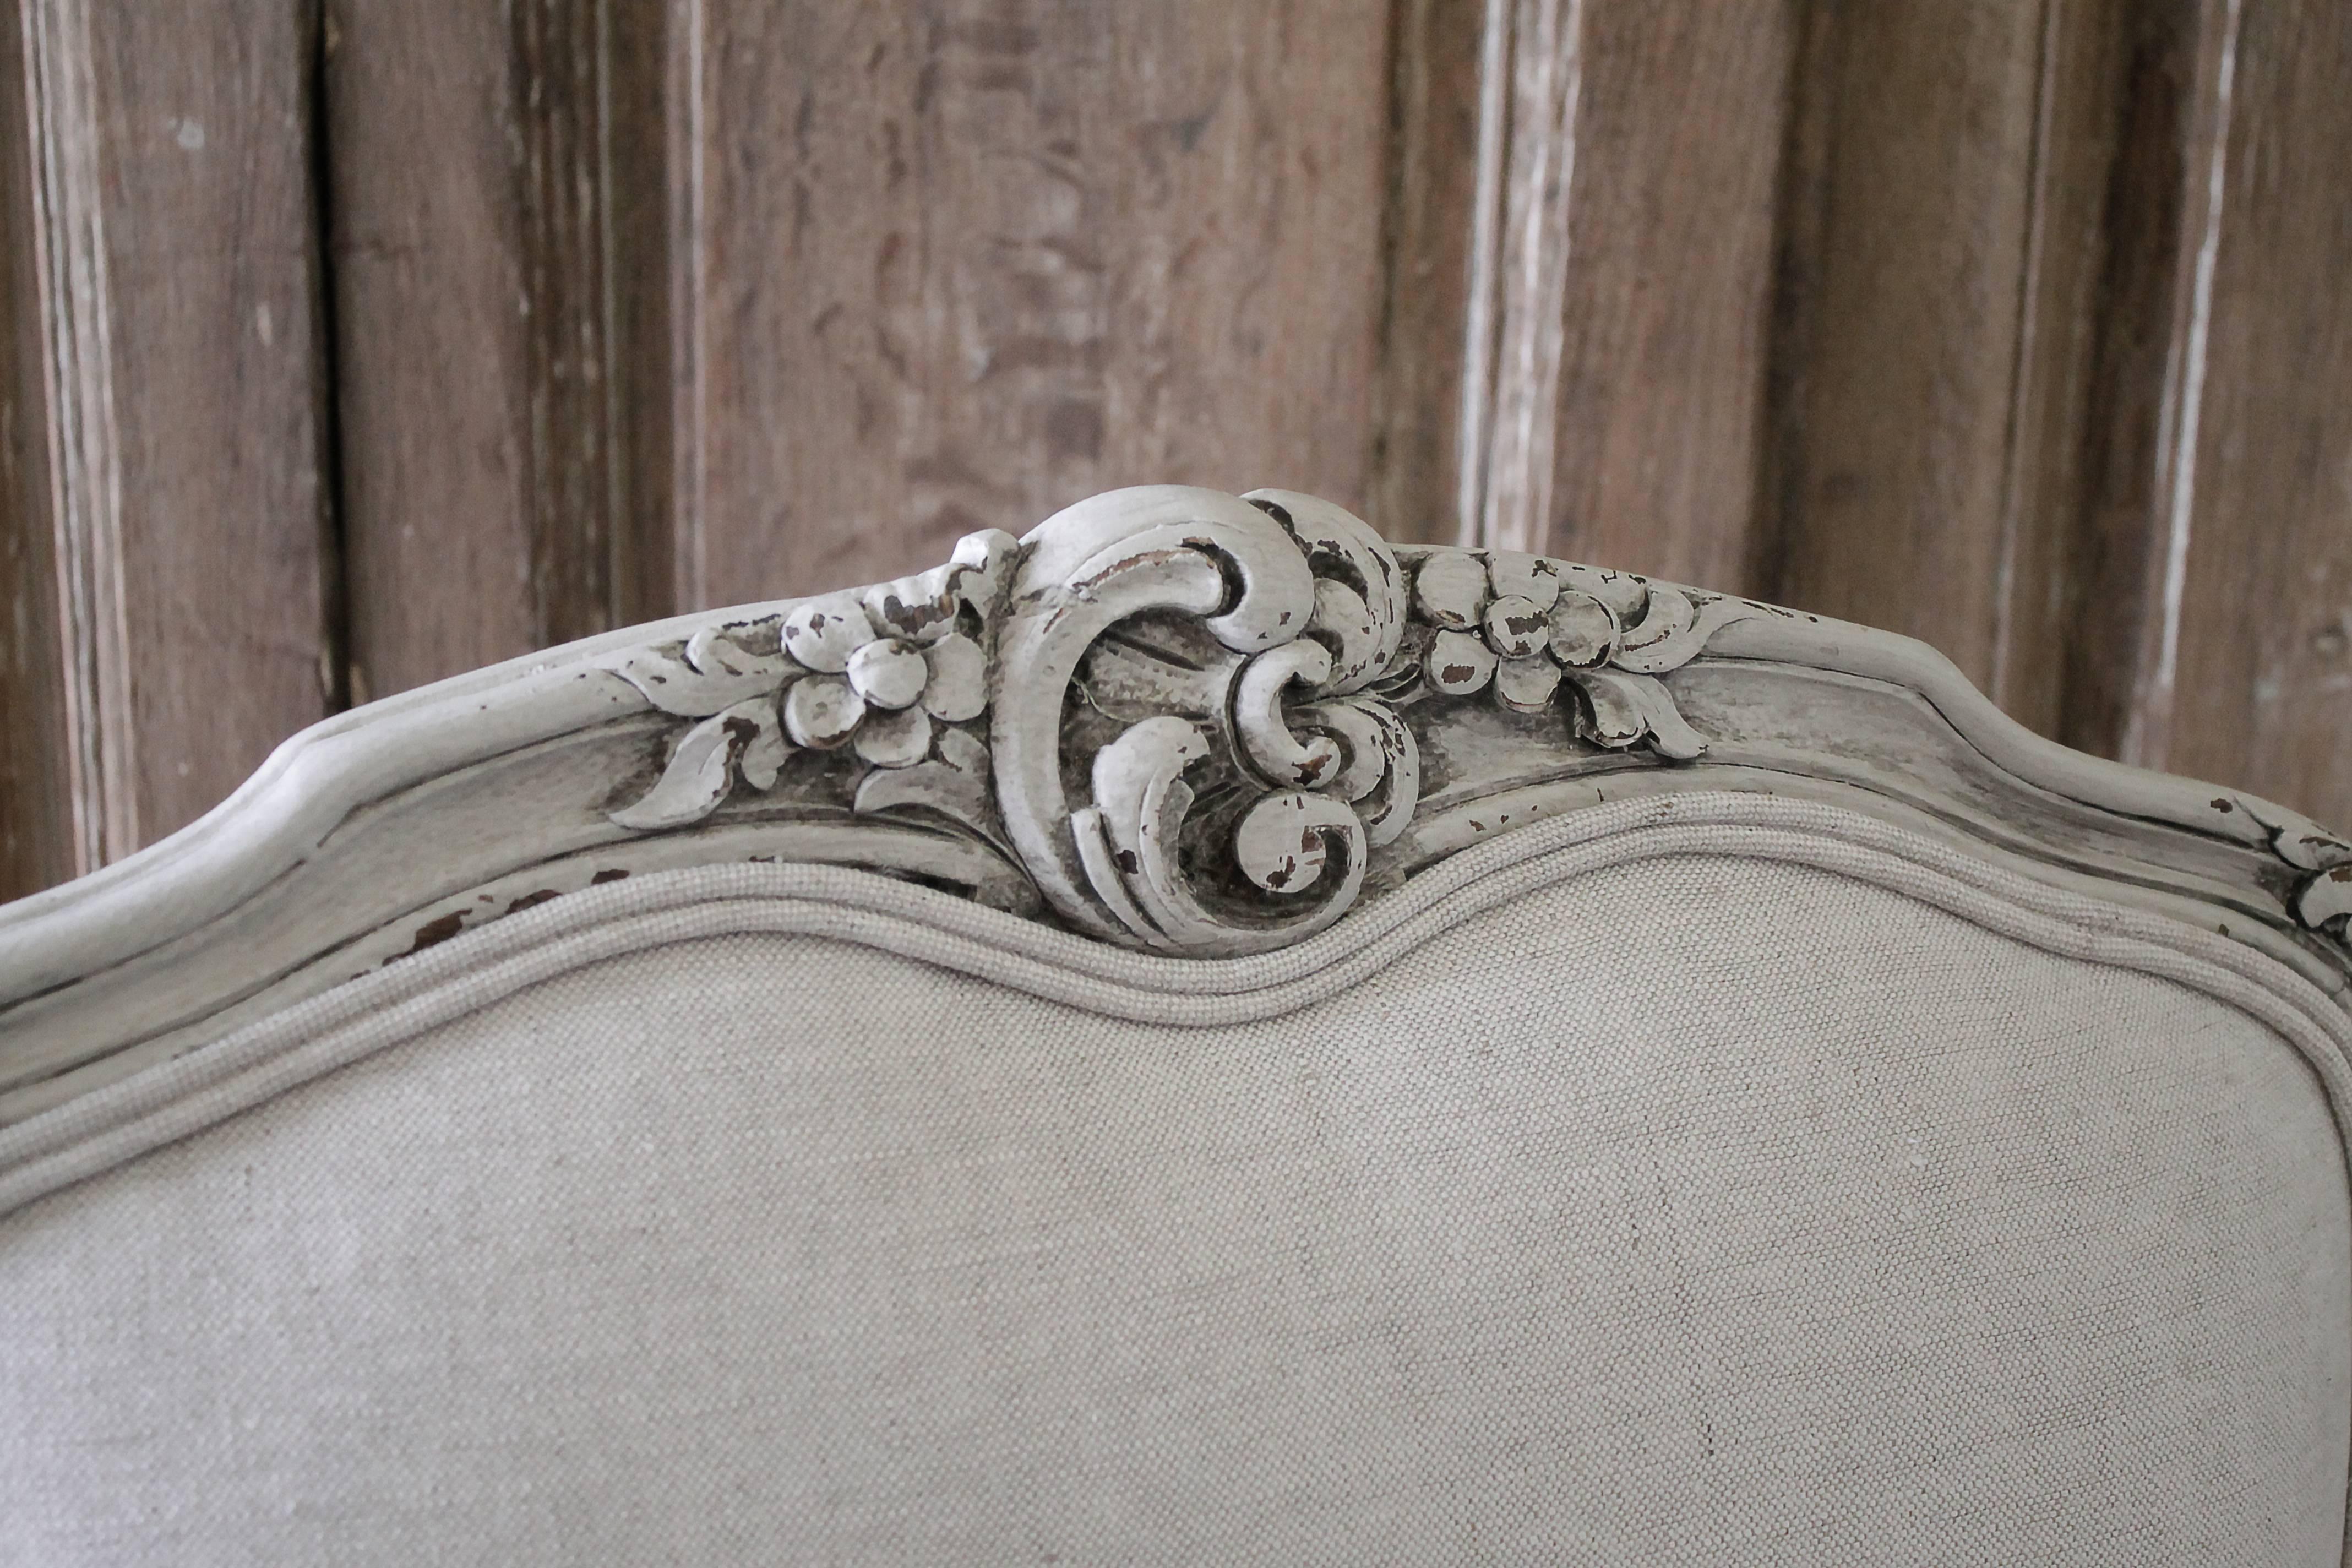 20th century French armchair upholstered in Belgian linen Painted in our oyster white, which is a true off-white with subtle distressed edges, and finished with an antique glazed patina. A cartouche carving with trailing floral vines are carved at